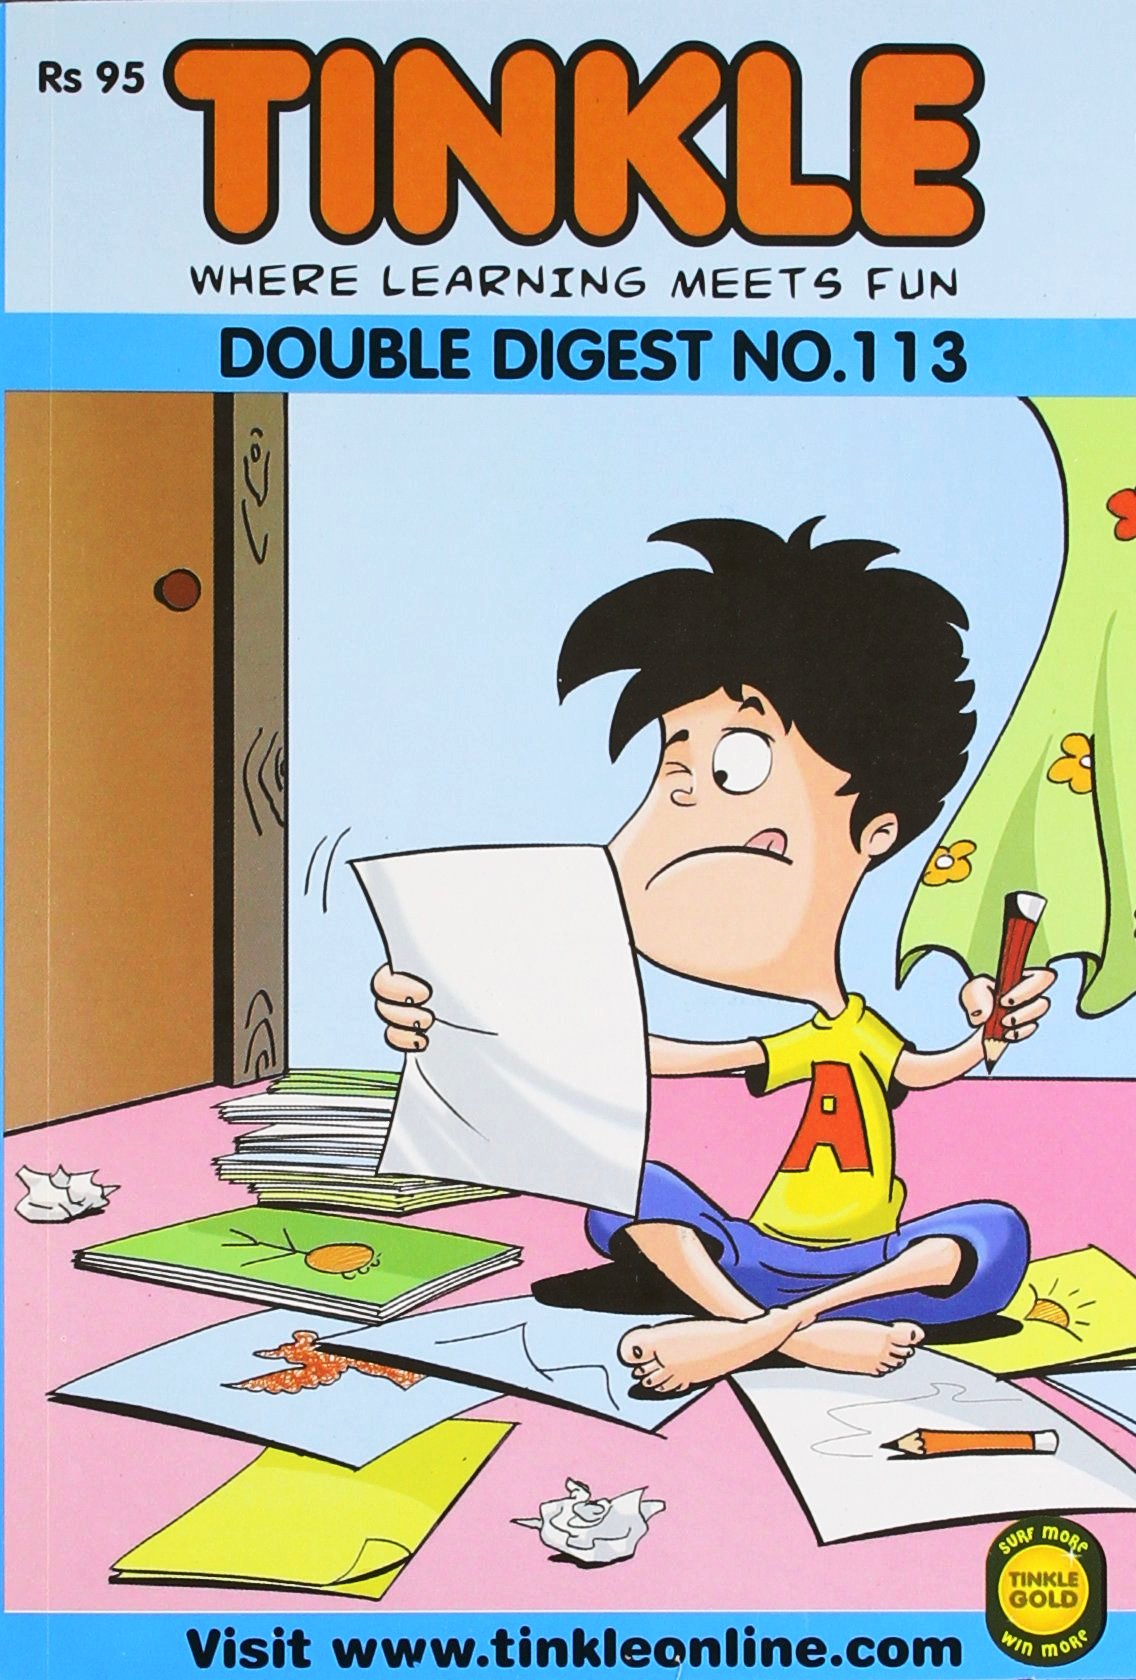 Tinkle - Double Digest No. 113